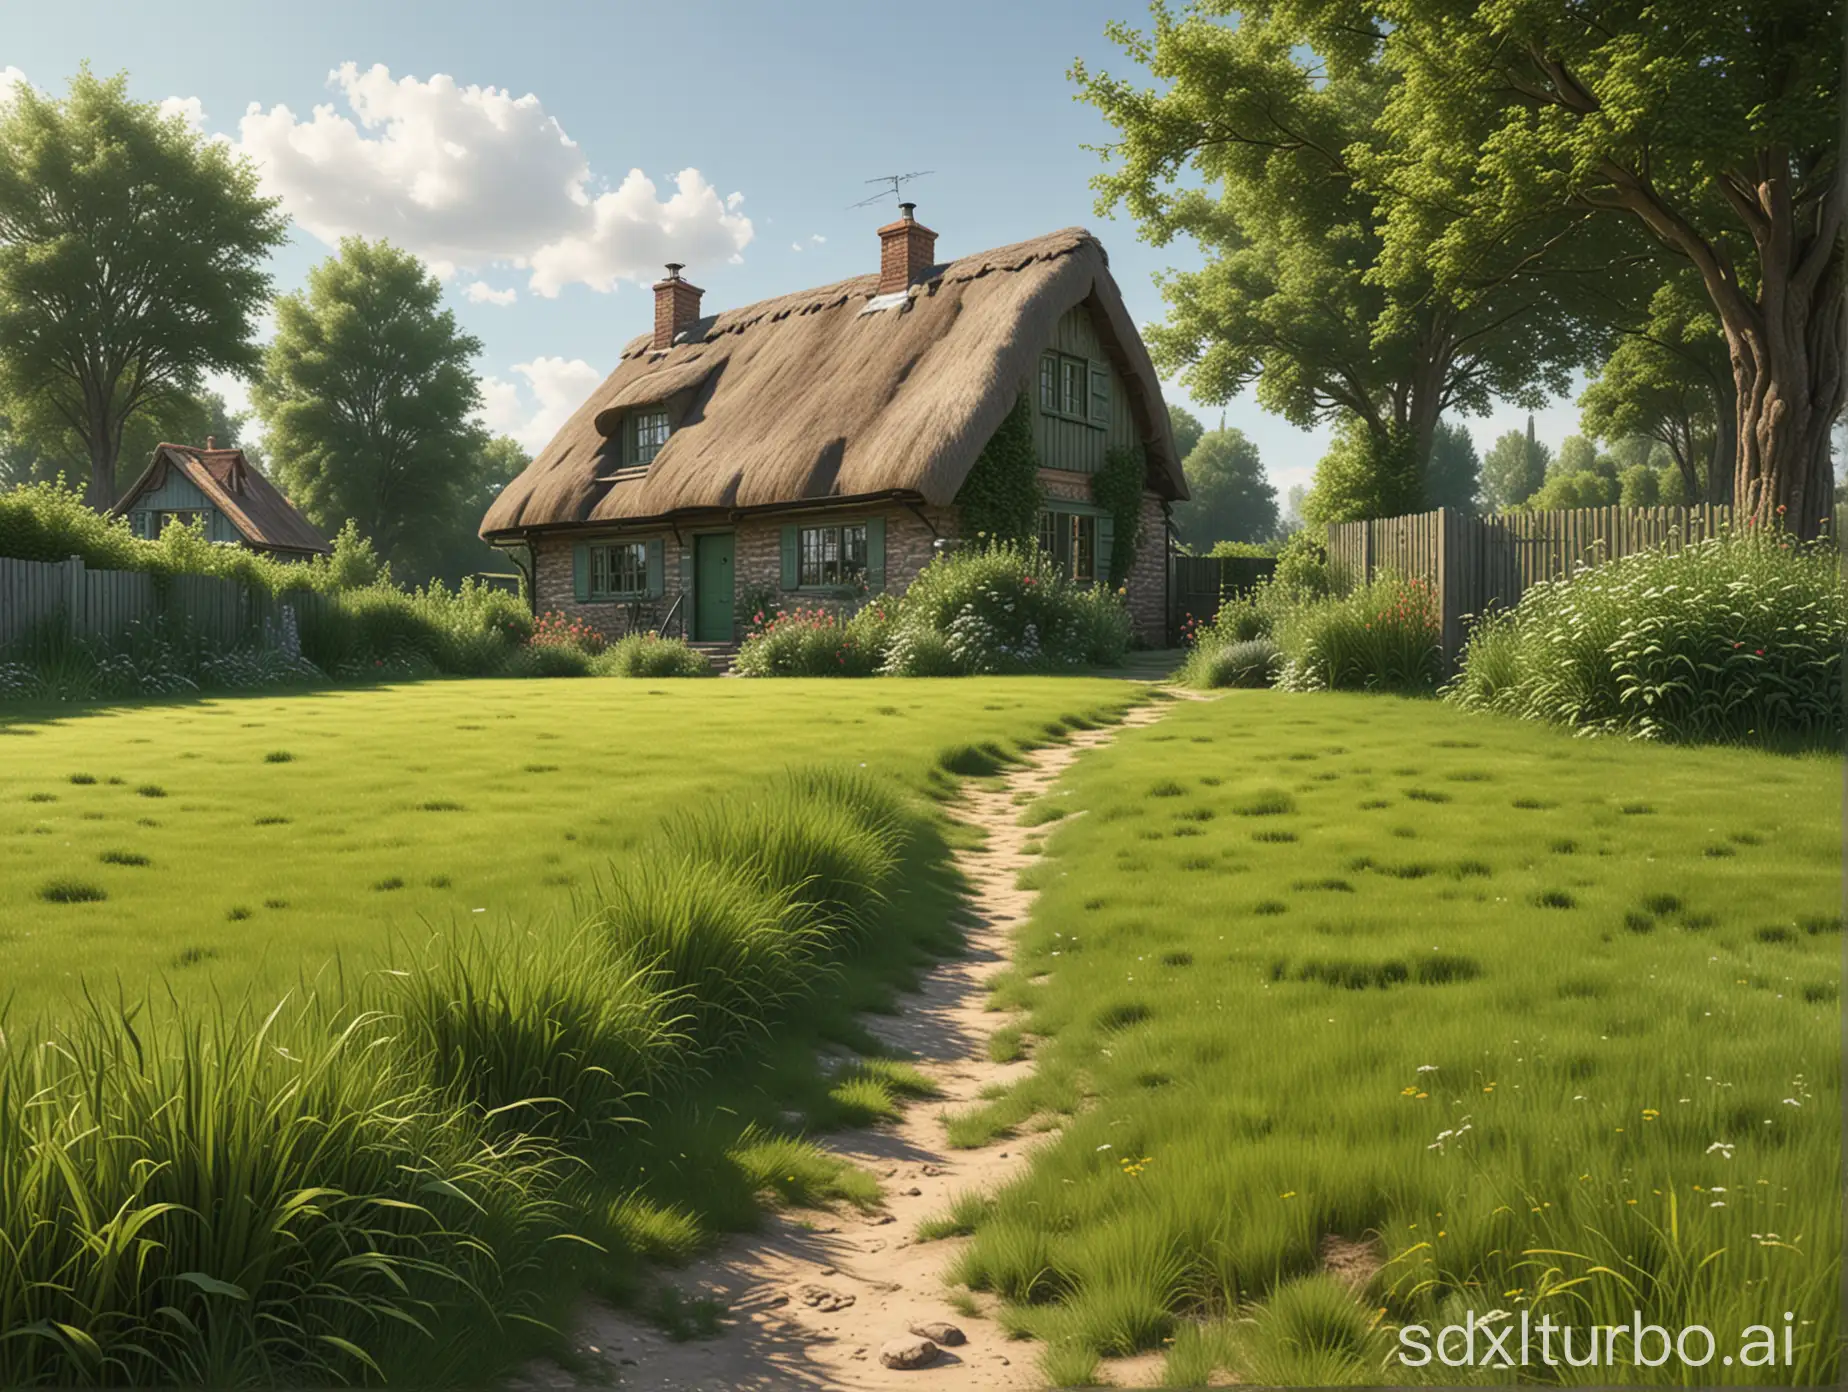 Sunny-Day-Cottage-Surrounded-by-Lush-Greenery-Realistic-High-Detail-Landscape